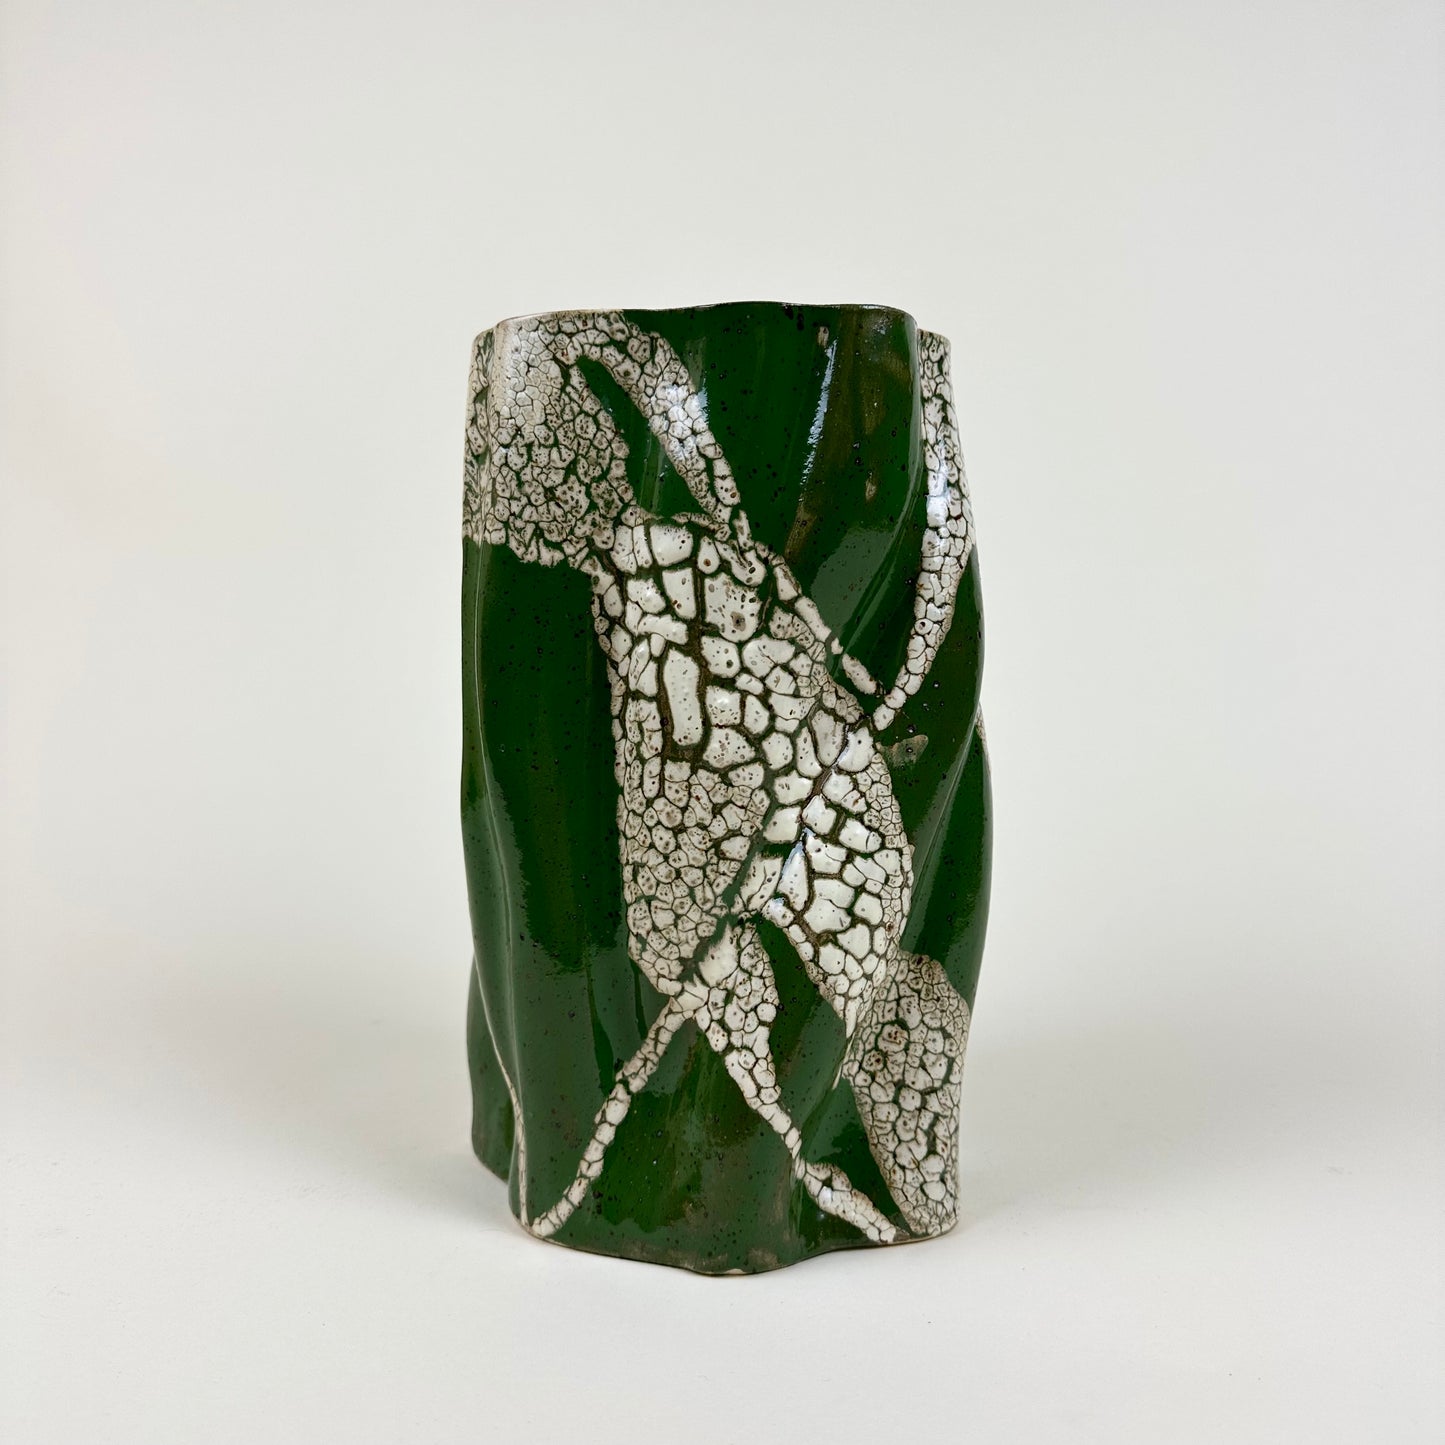 Ceramic vase, green and white, by Astrid Öhman